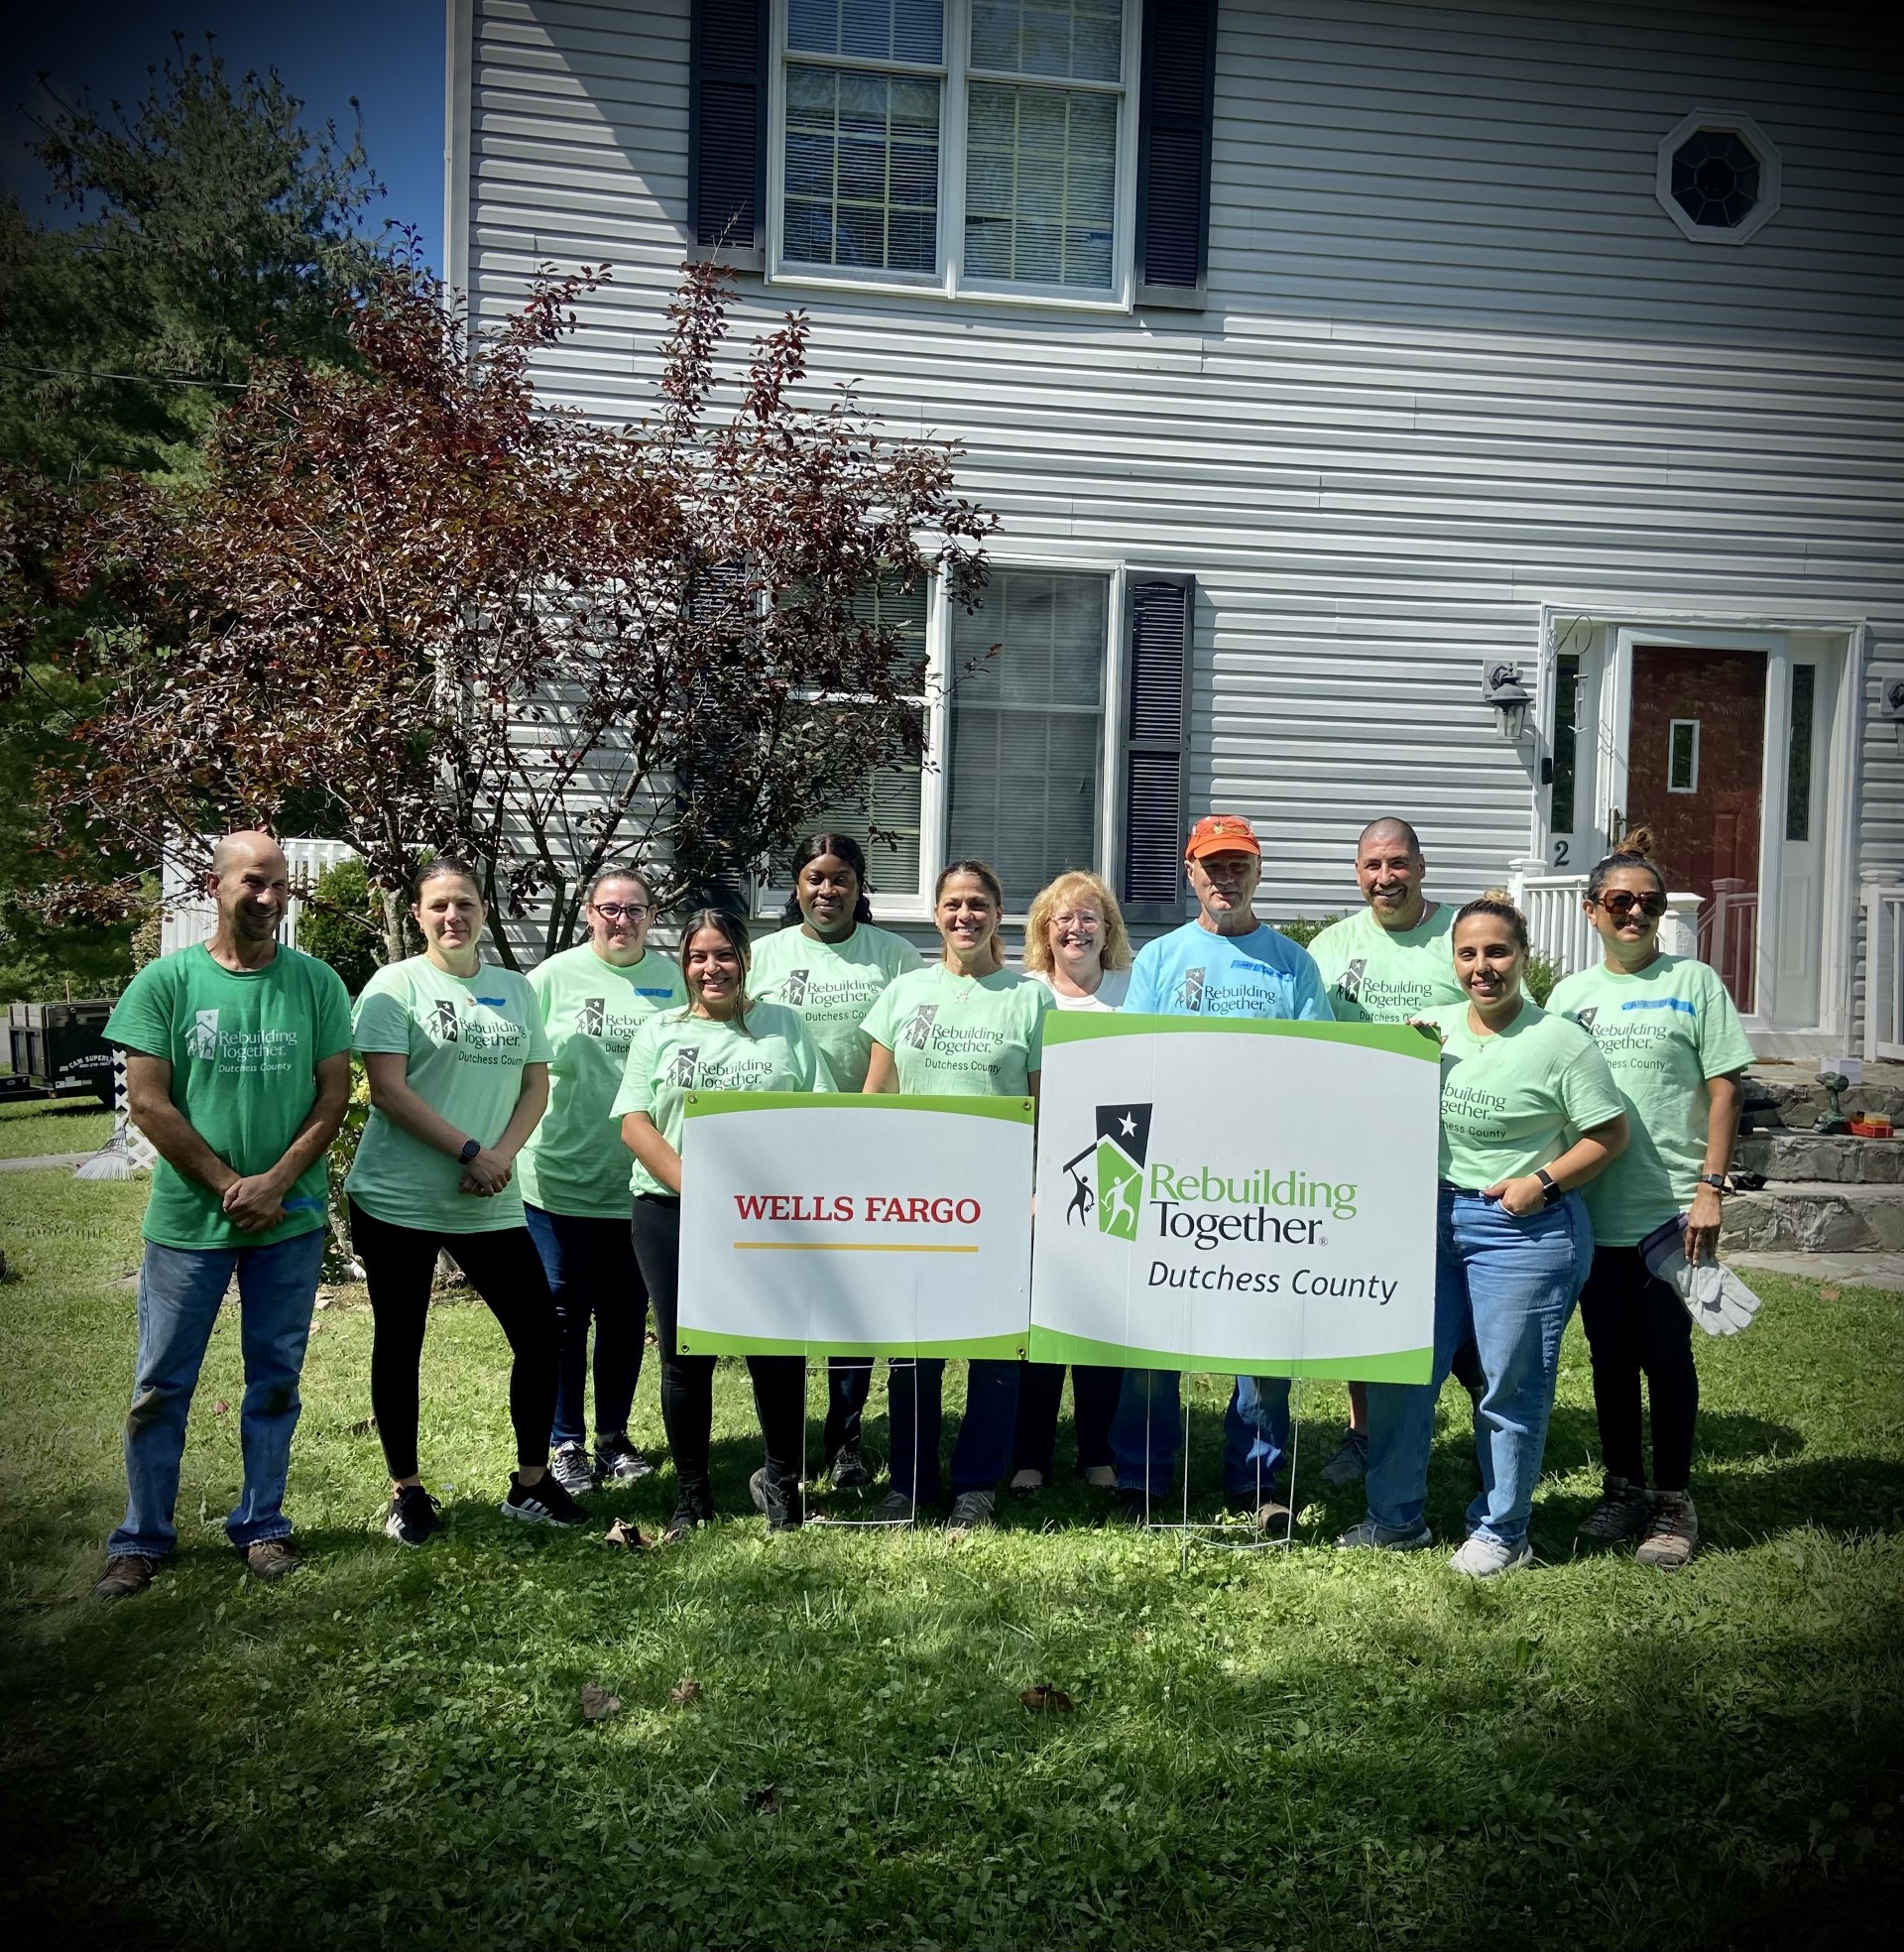 Wells Fargo Team poses with Rebuilding Together at project day event.